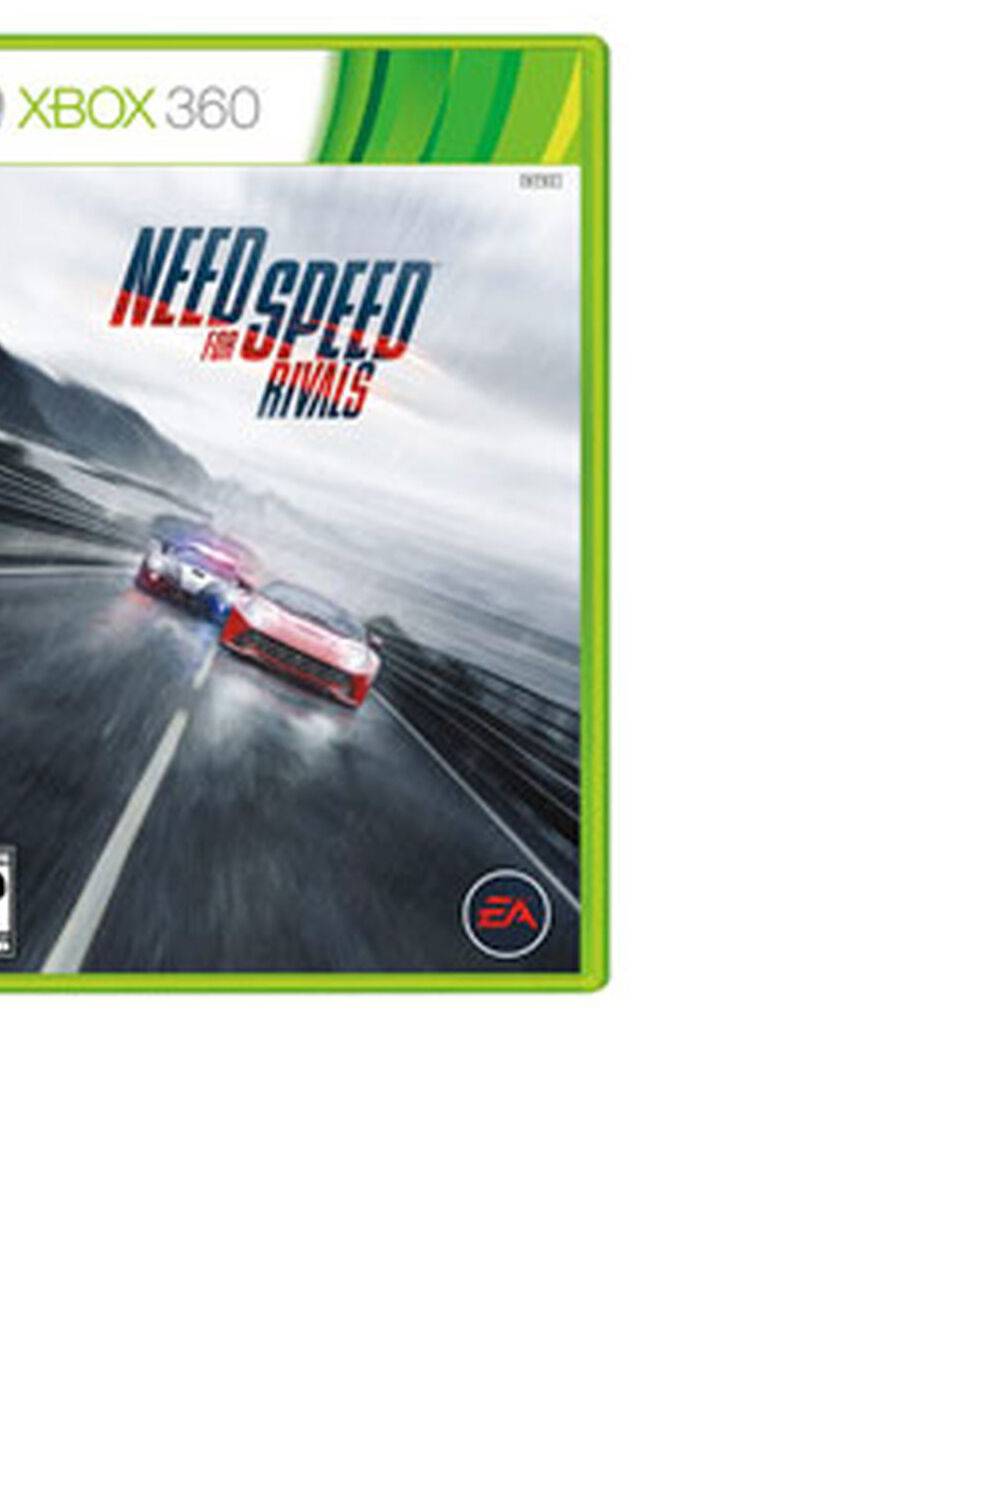 ELECTRONIC ARTS - NEED FOR SPEED RIVALS   X360